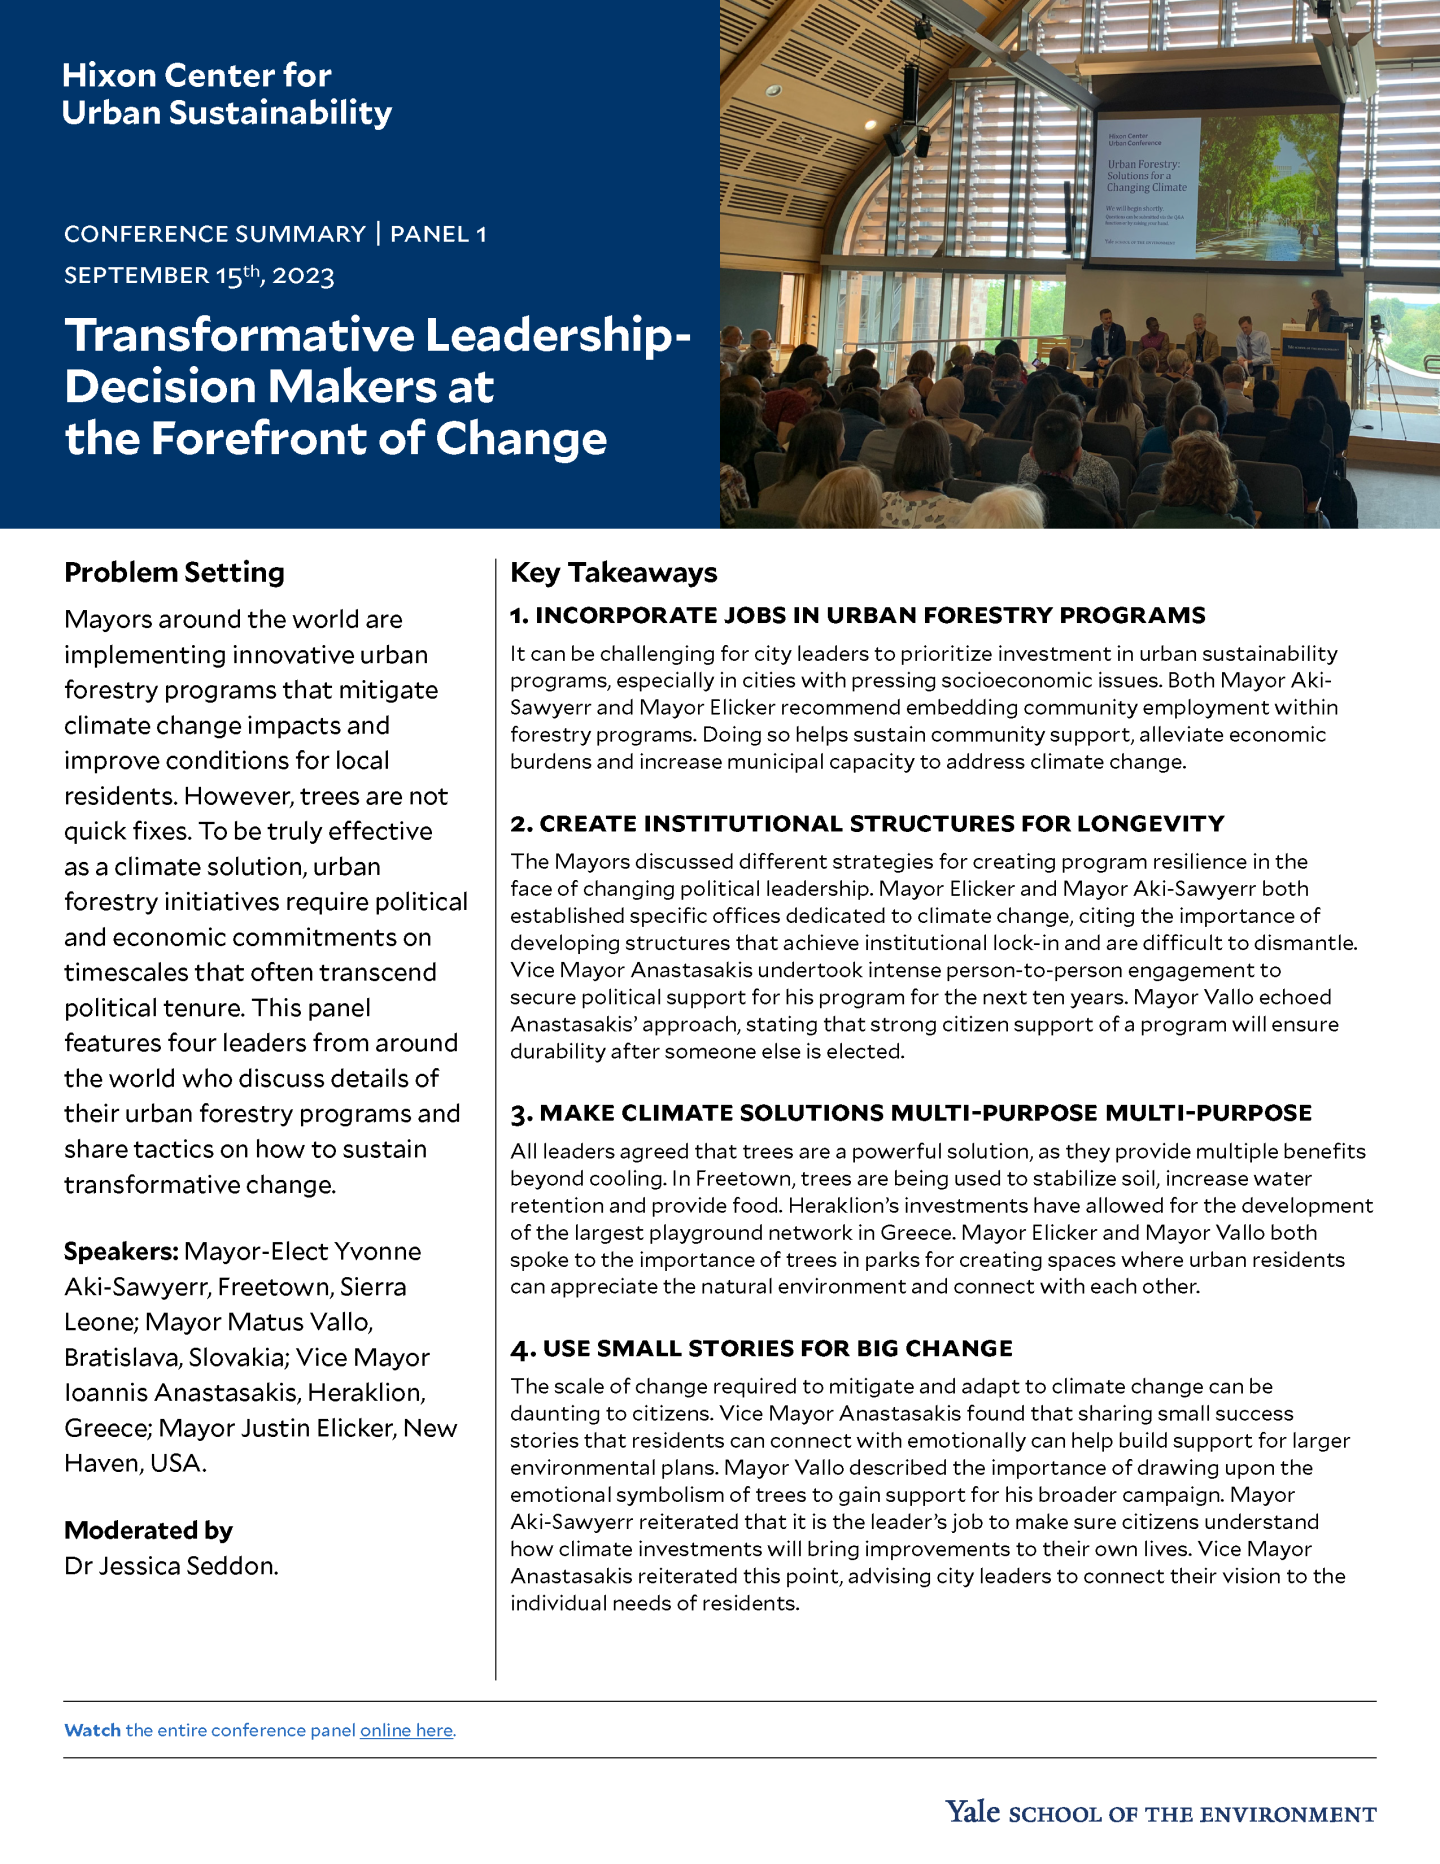 Conference summary for panel on transformative leadership, page 1